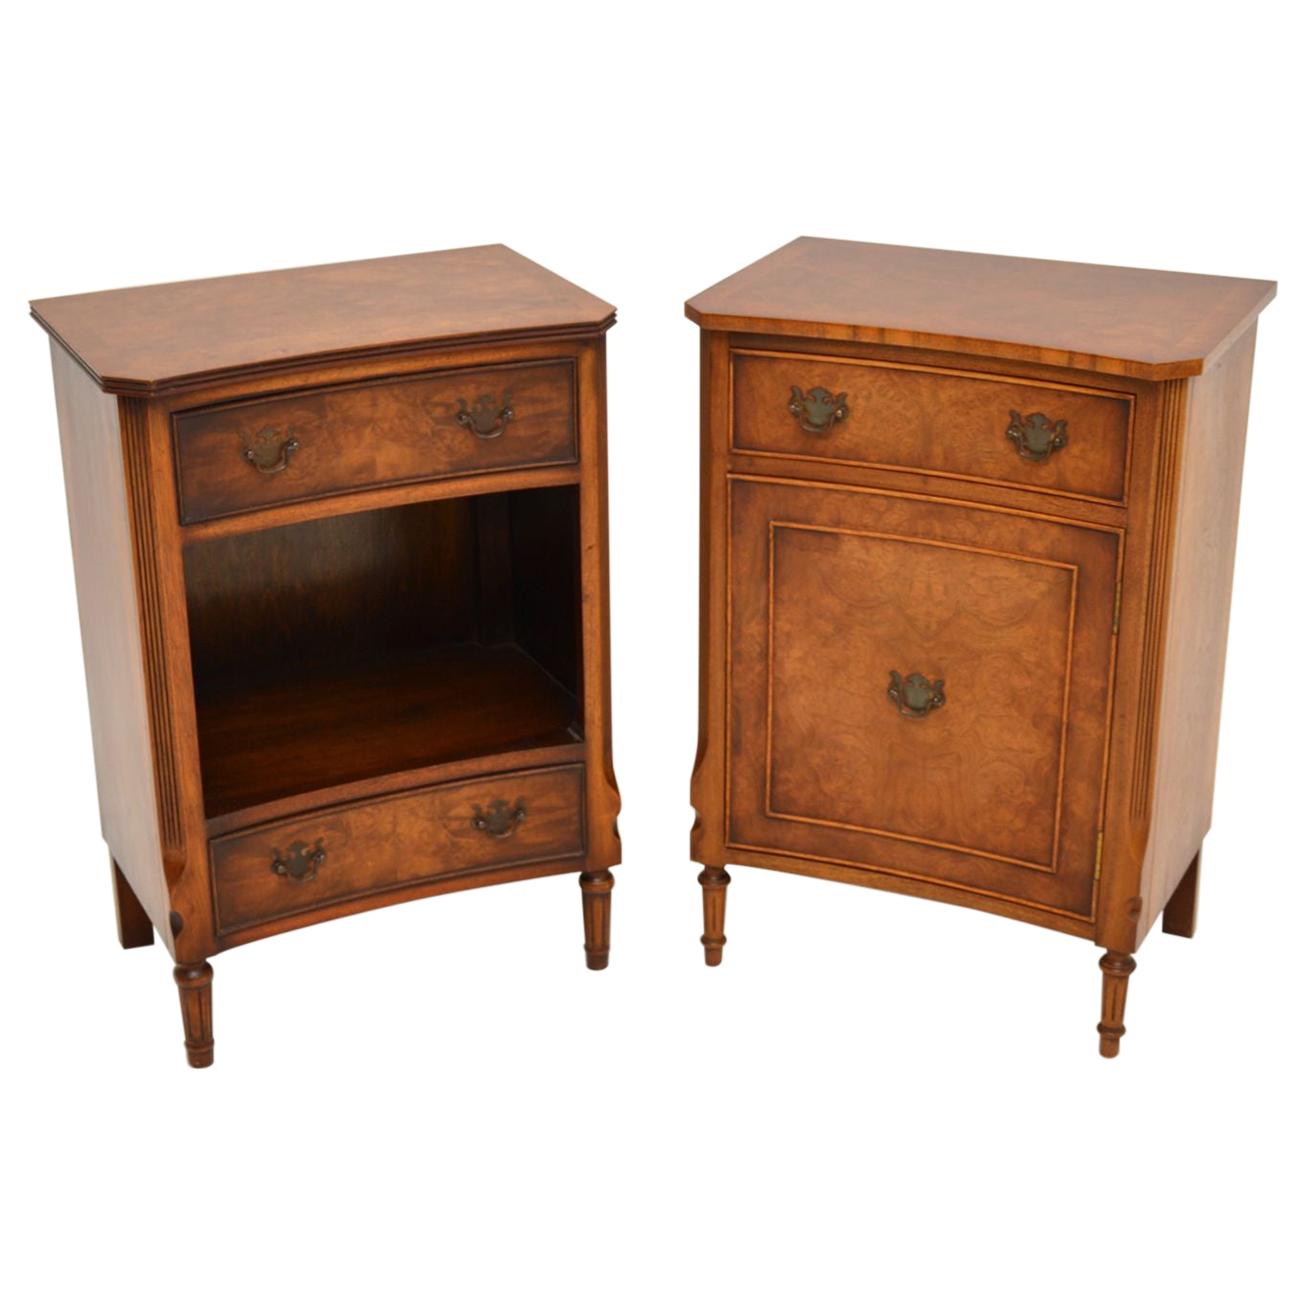 Pair of Antique Georgian Style Burr Walnut Bedside Cabinets